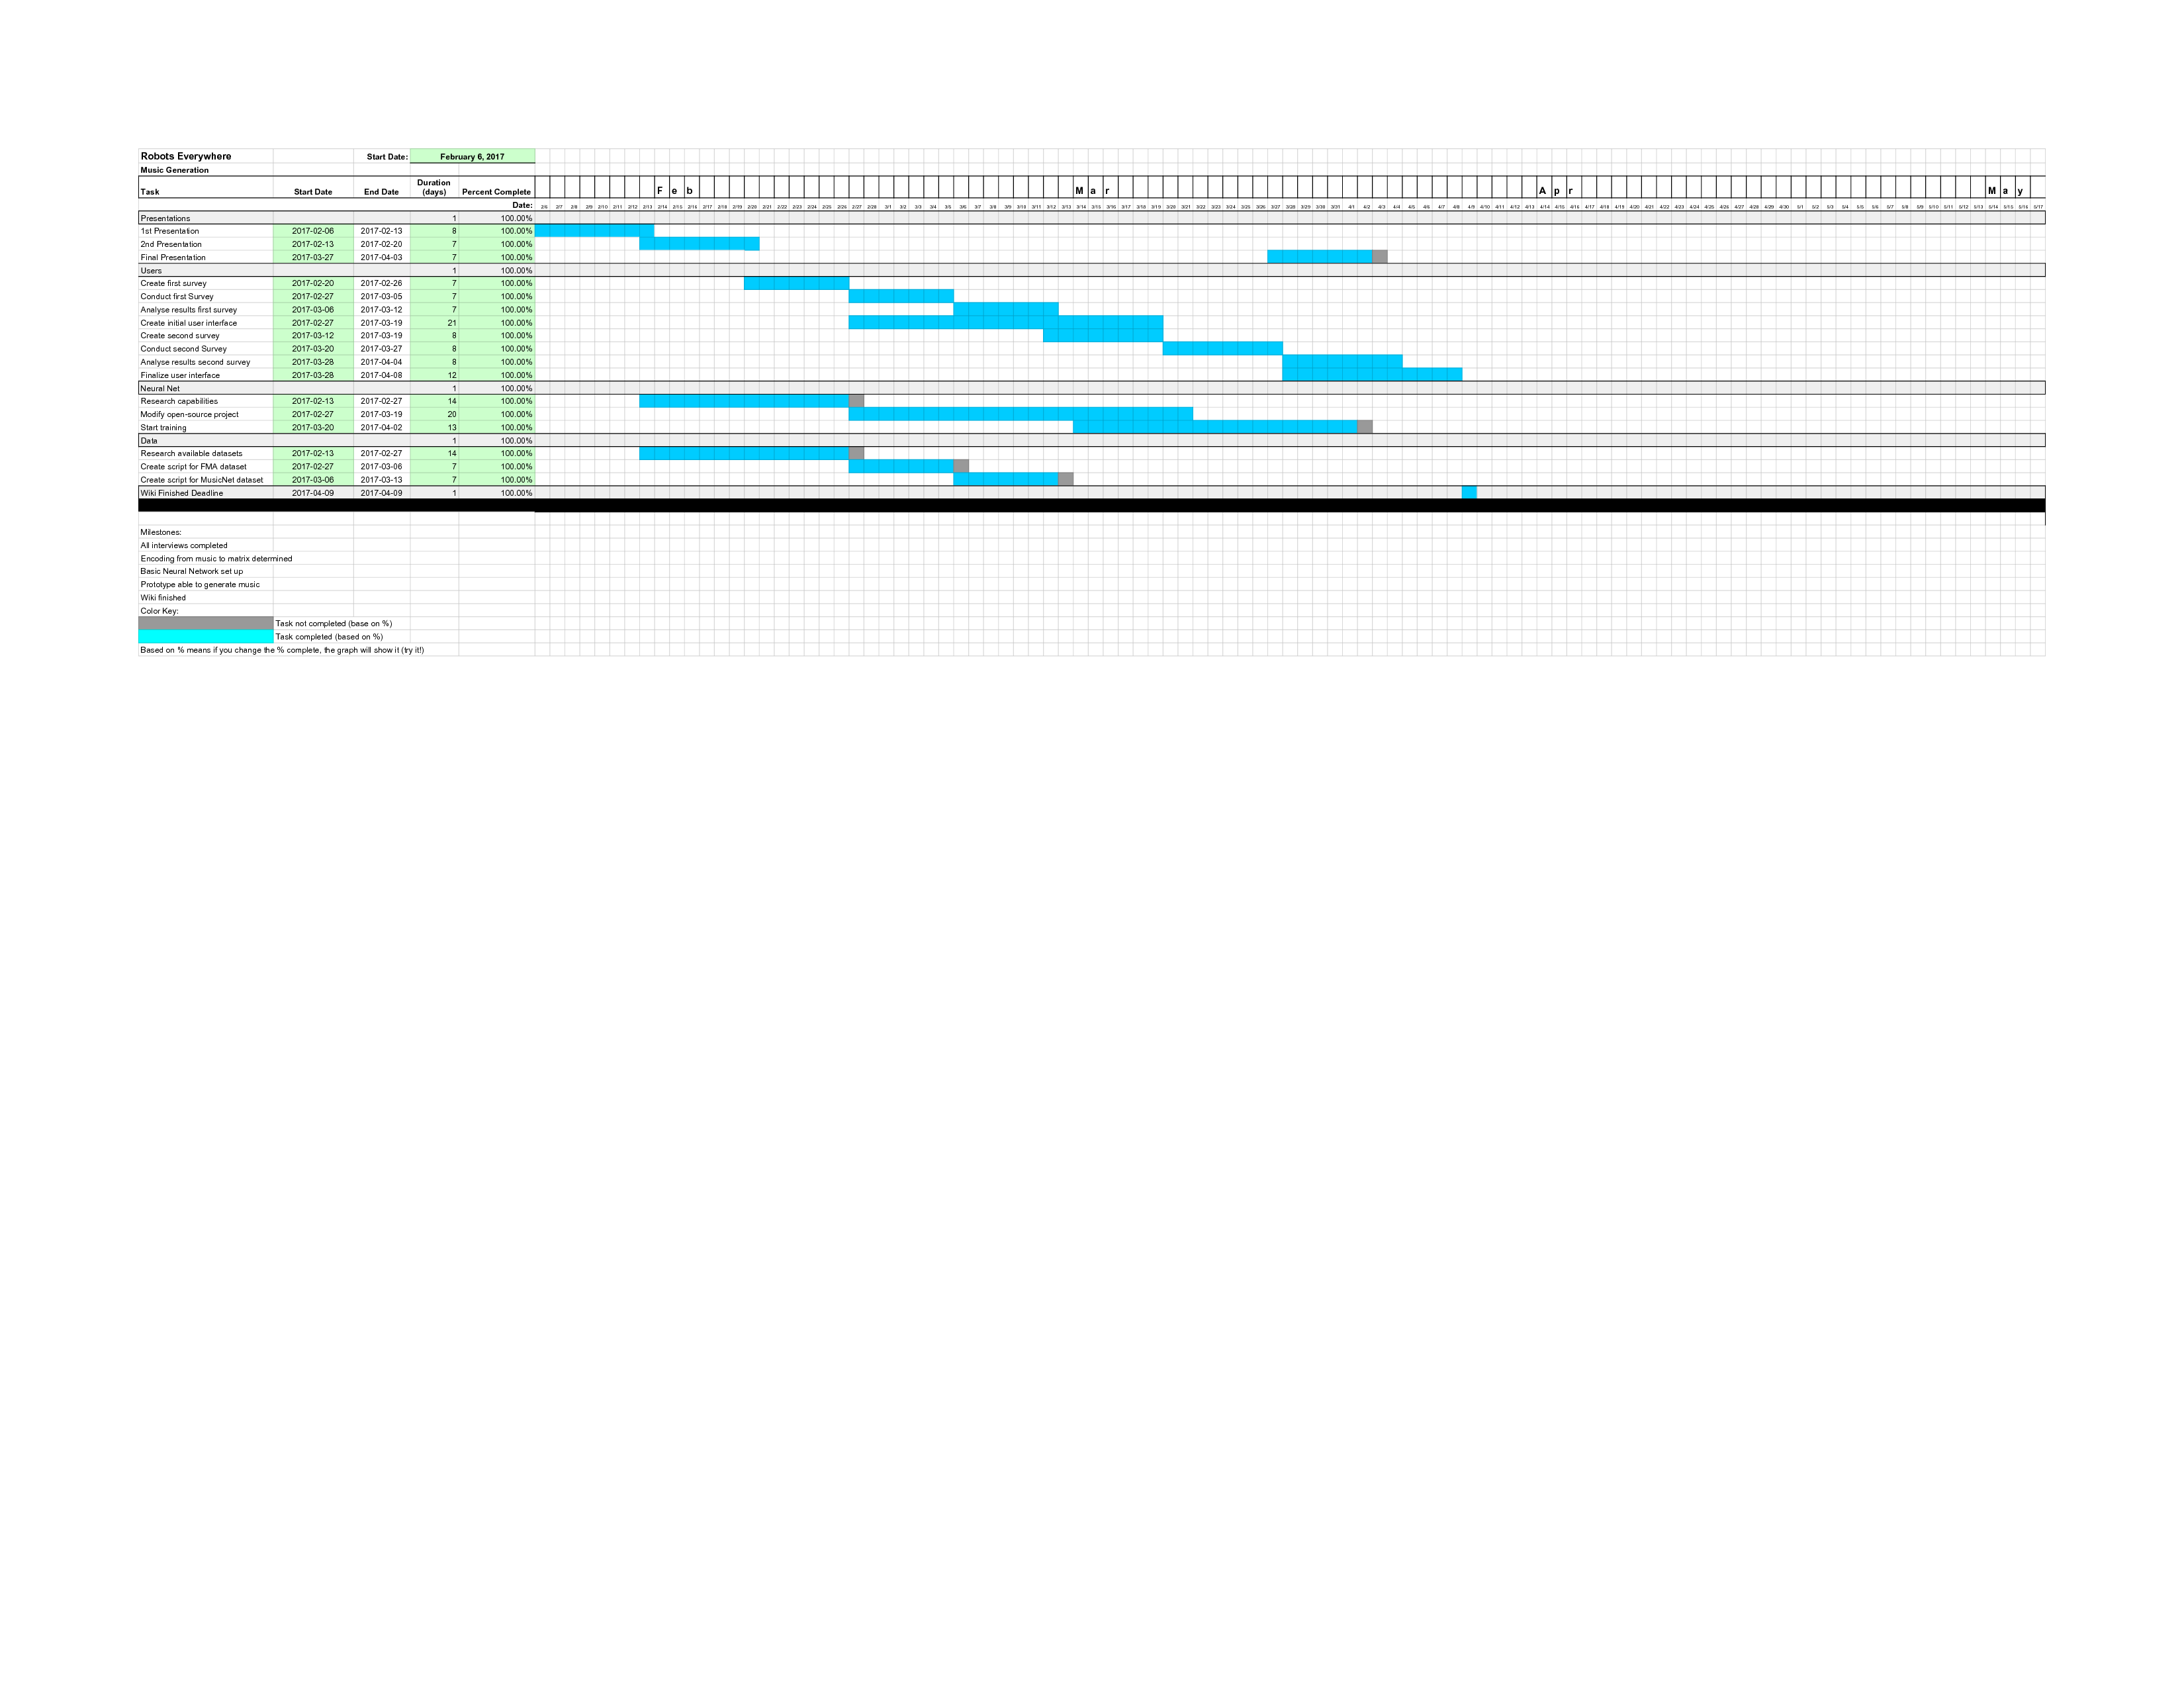 The Gantt chart for this project.